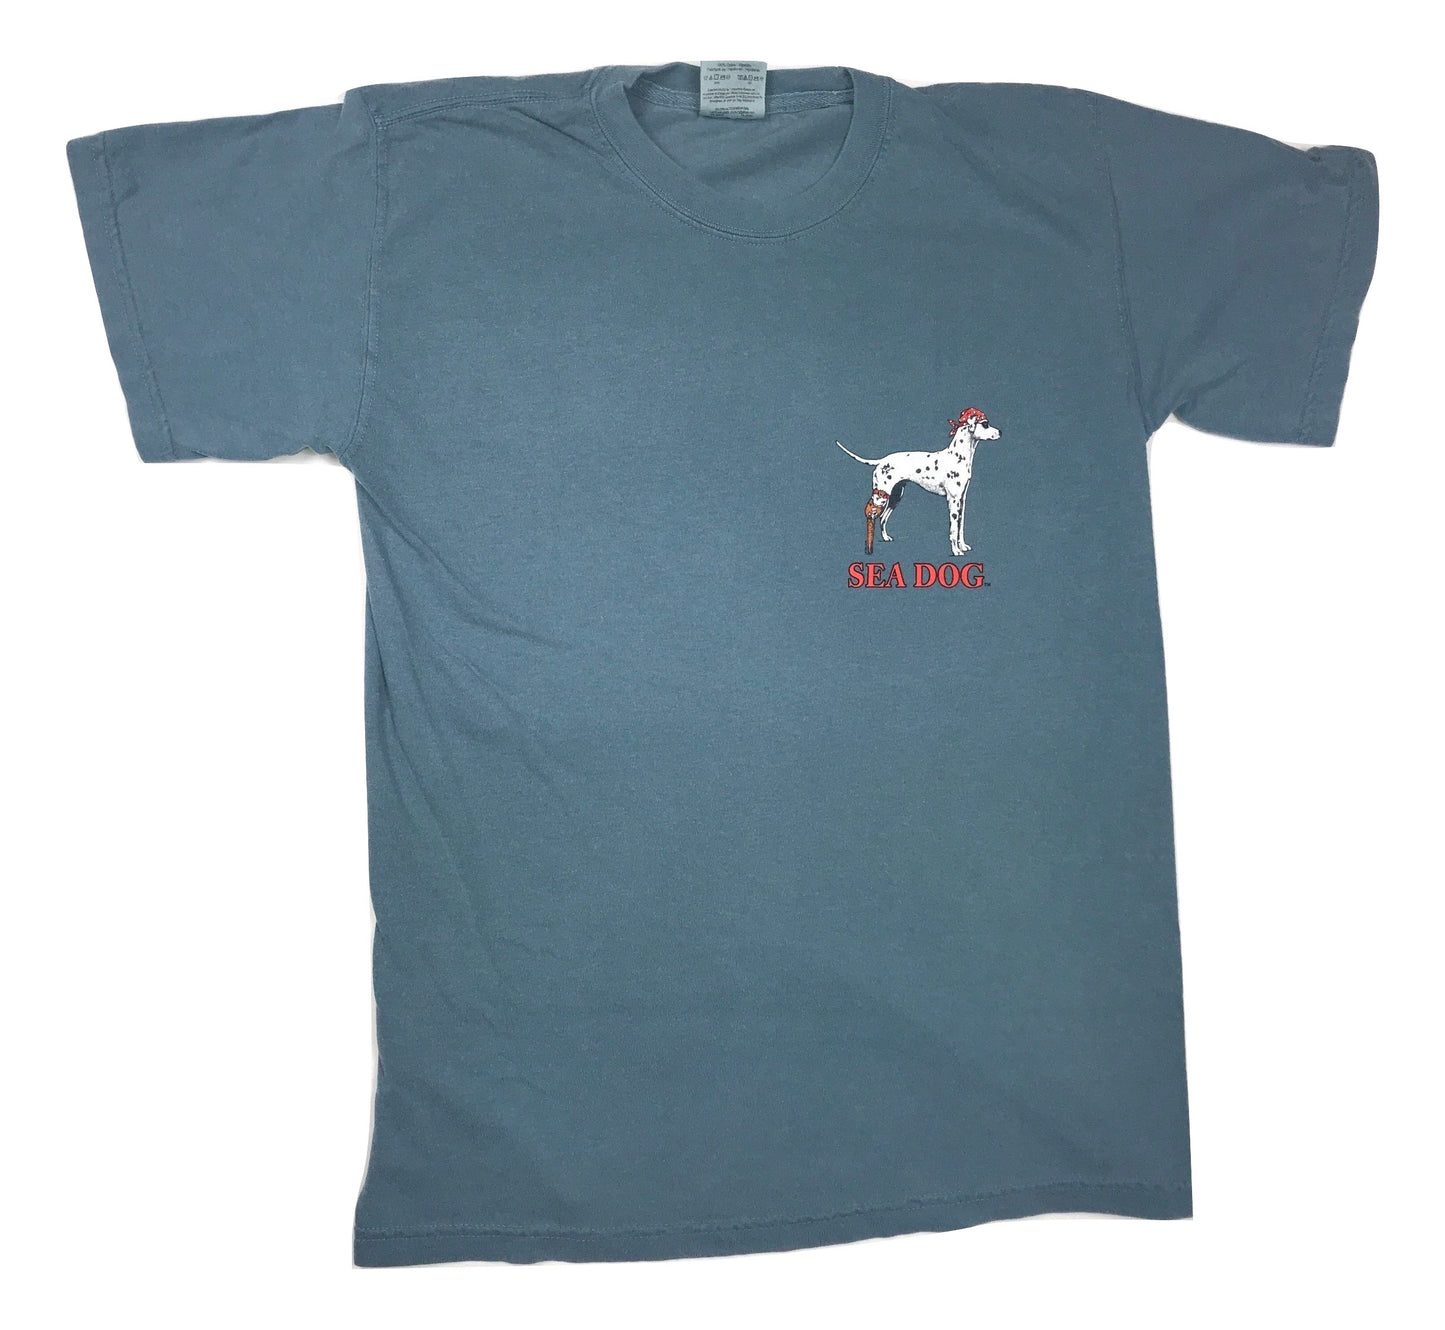 In Dog Years I've Only Had One - Sea Dog T Shirt - Blue Jean